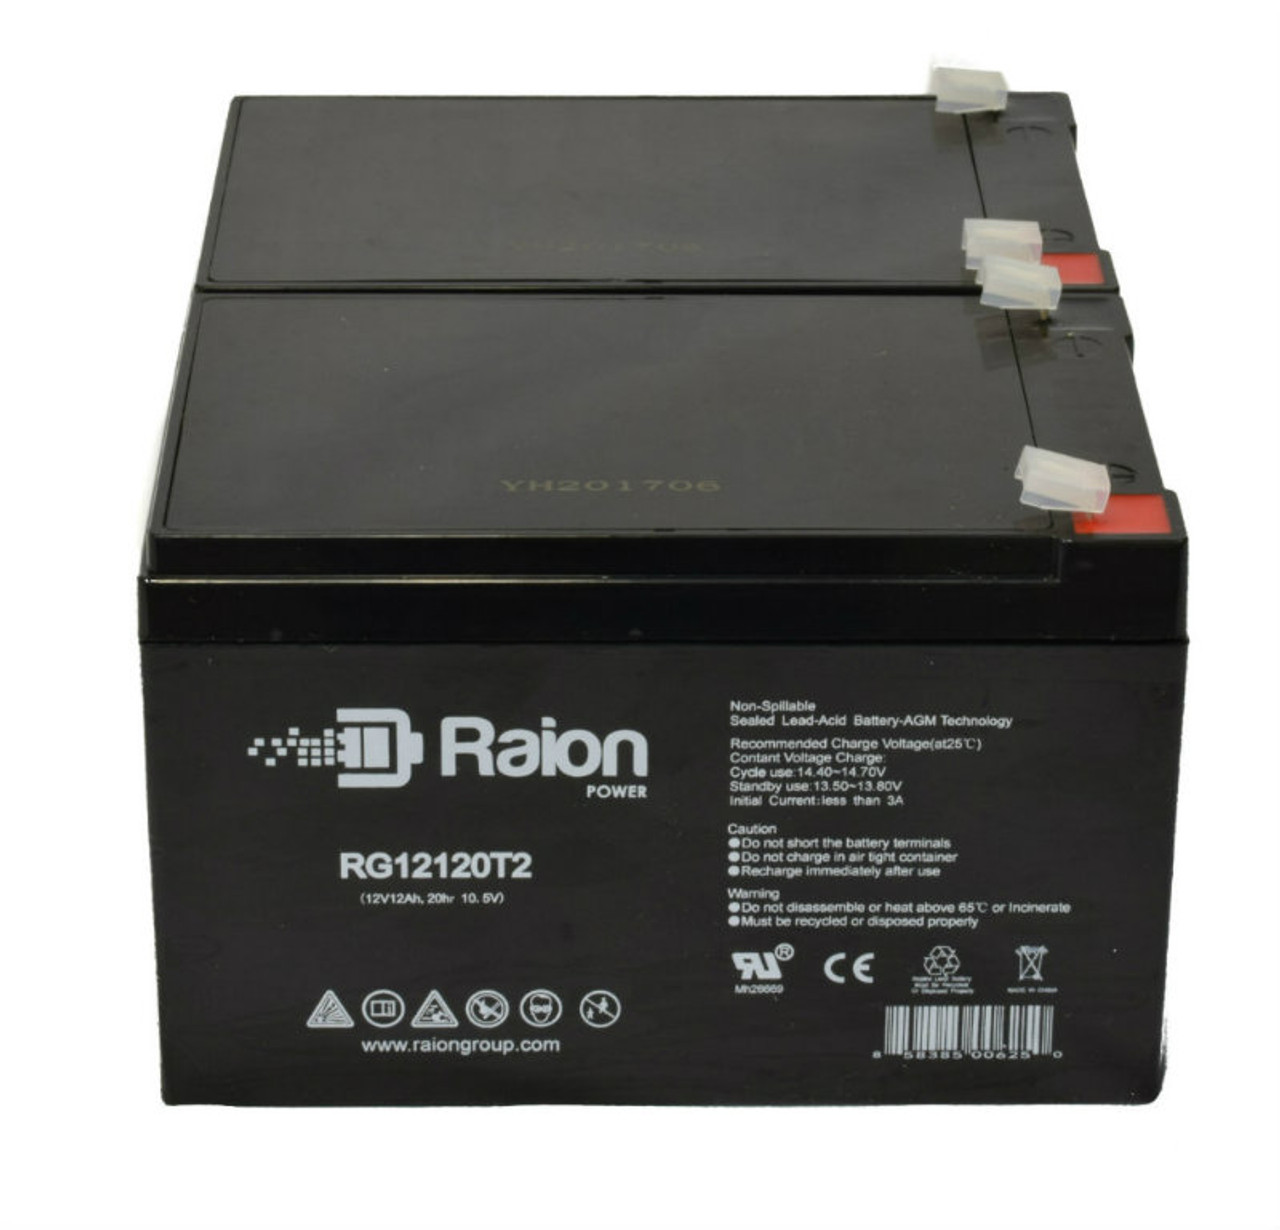 Raion Power RG12120T2 Replacement Battery Set for Drive Medical Design S37510 Mobility Scooter - 2 Pack